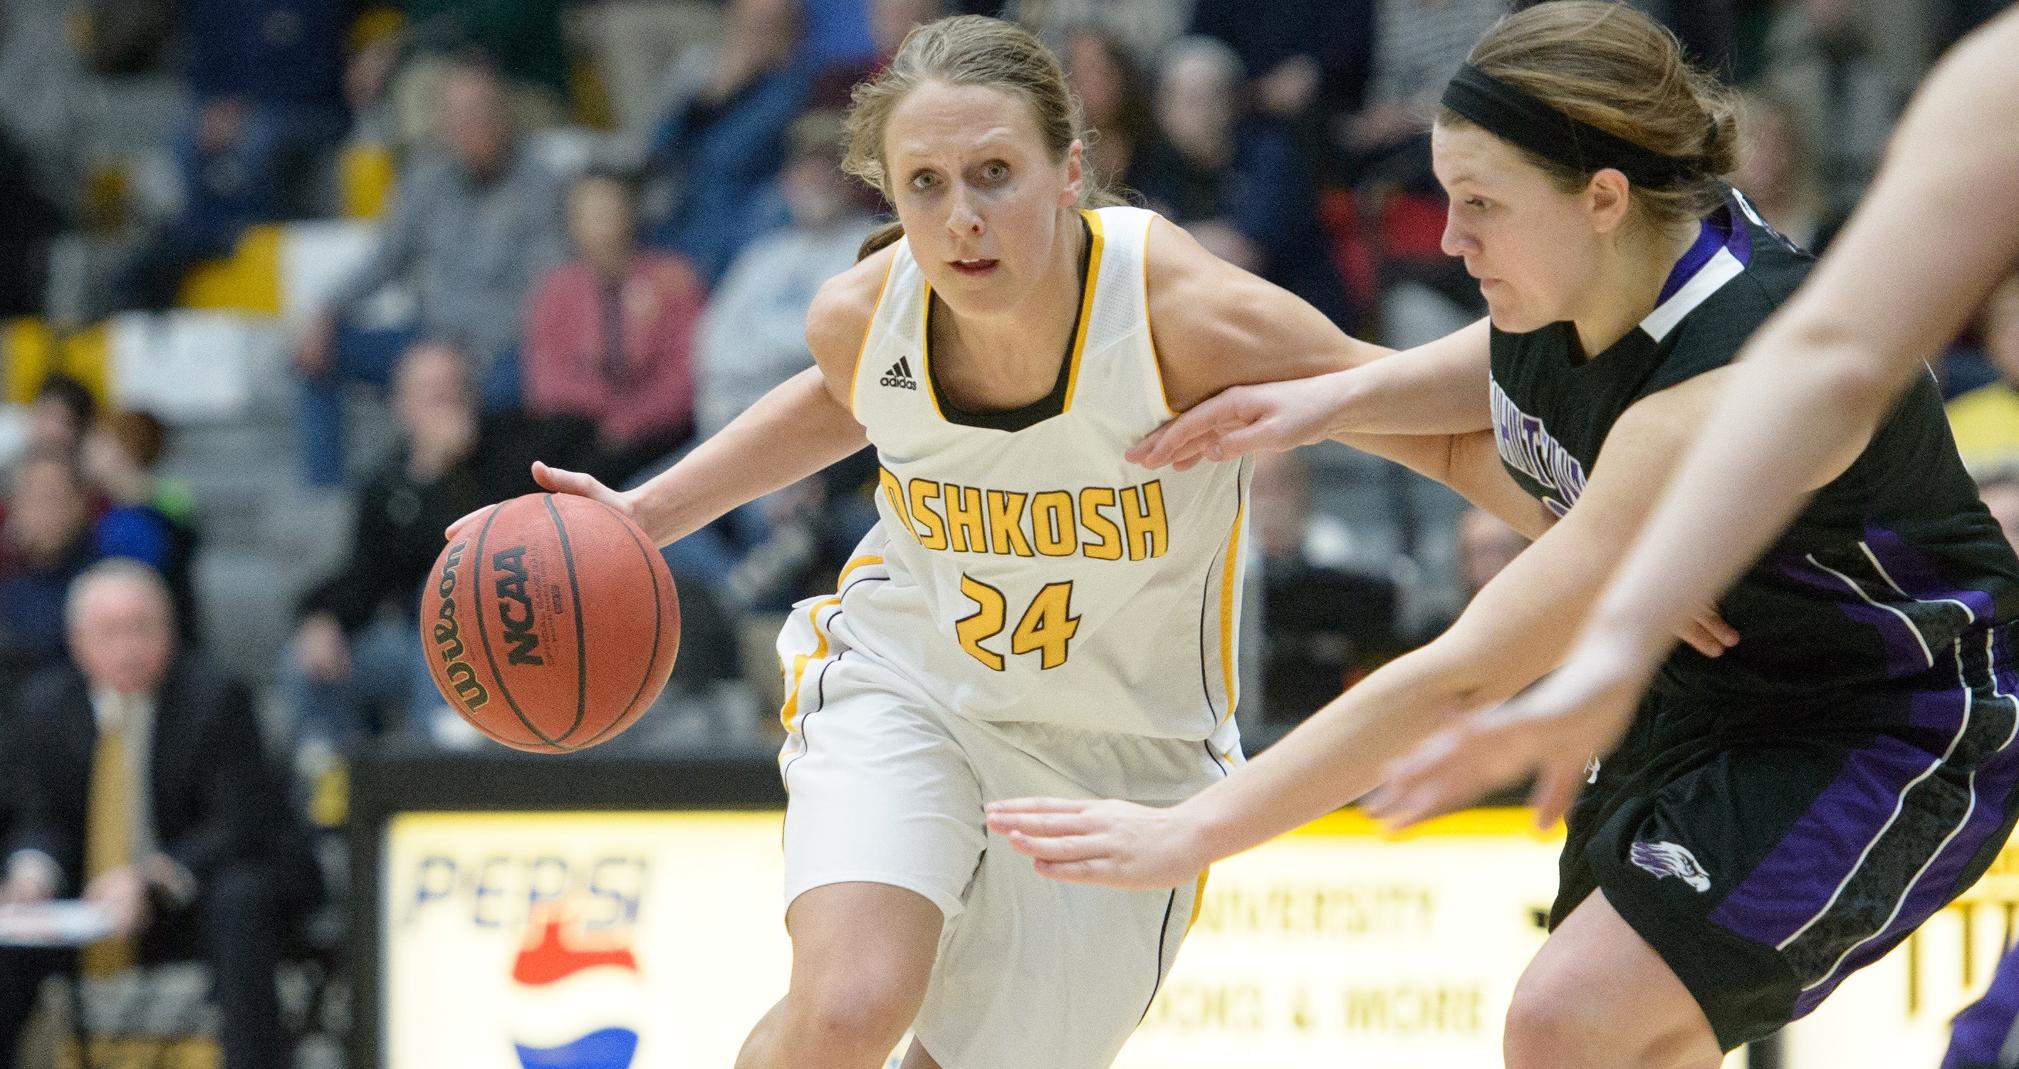 Eliza Campbell led UW-Oshkosh with a season-high 16 points and a career-best nine rebounds.